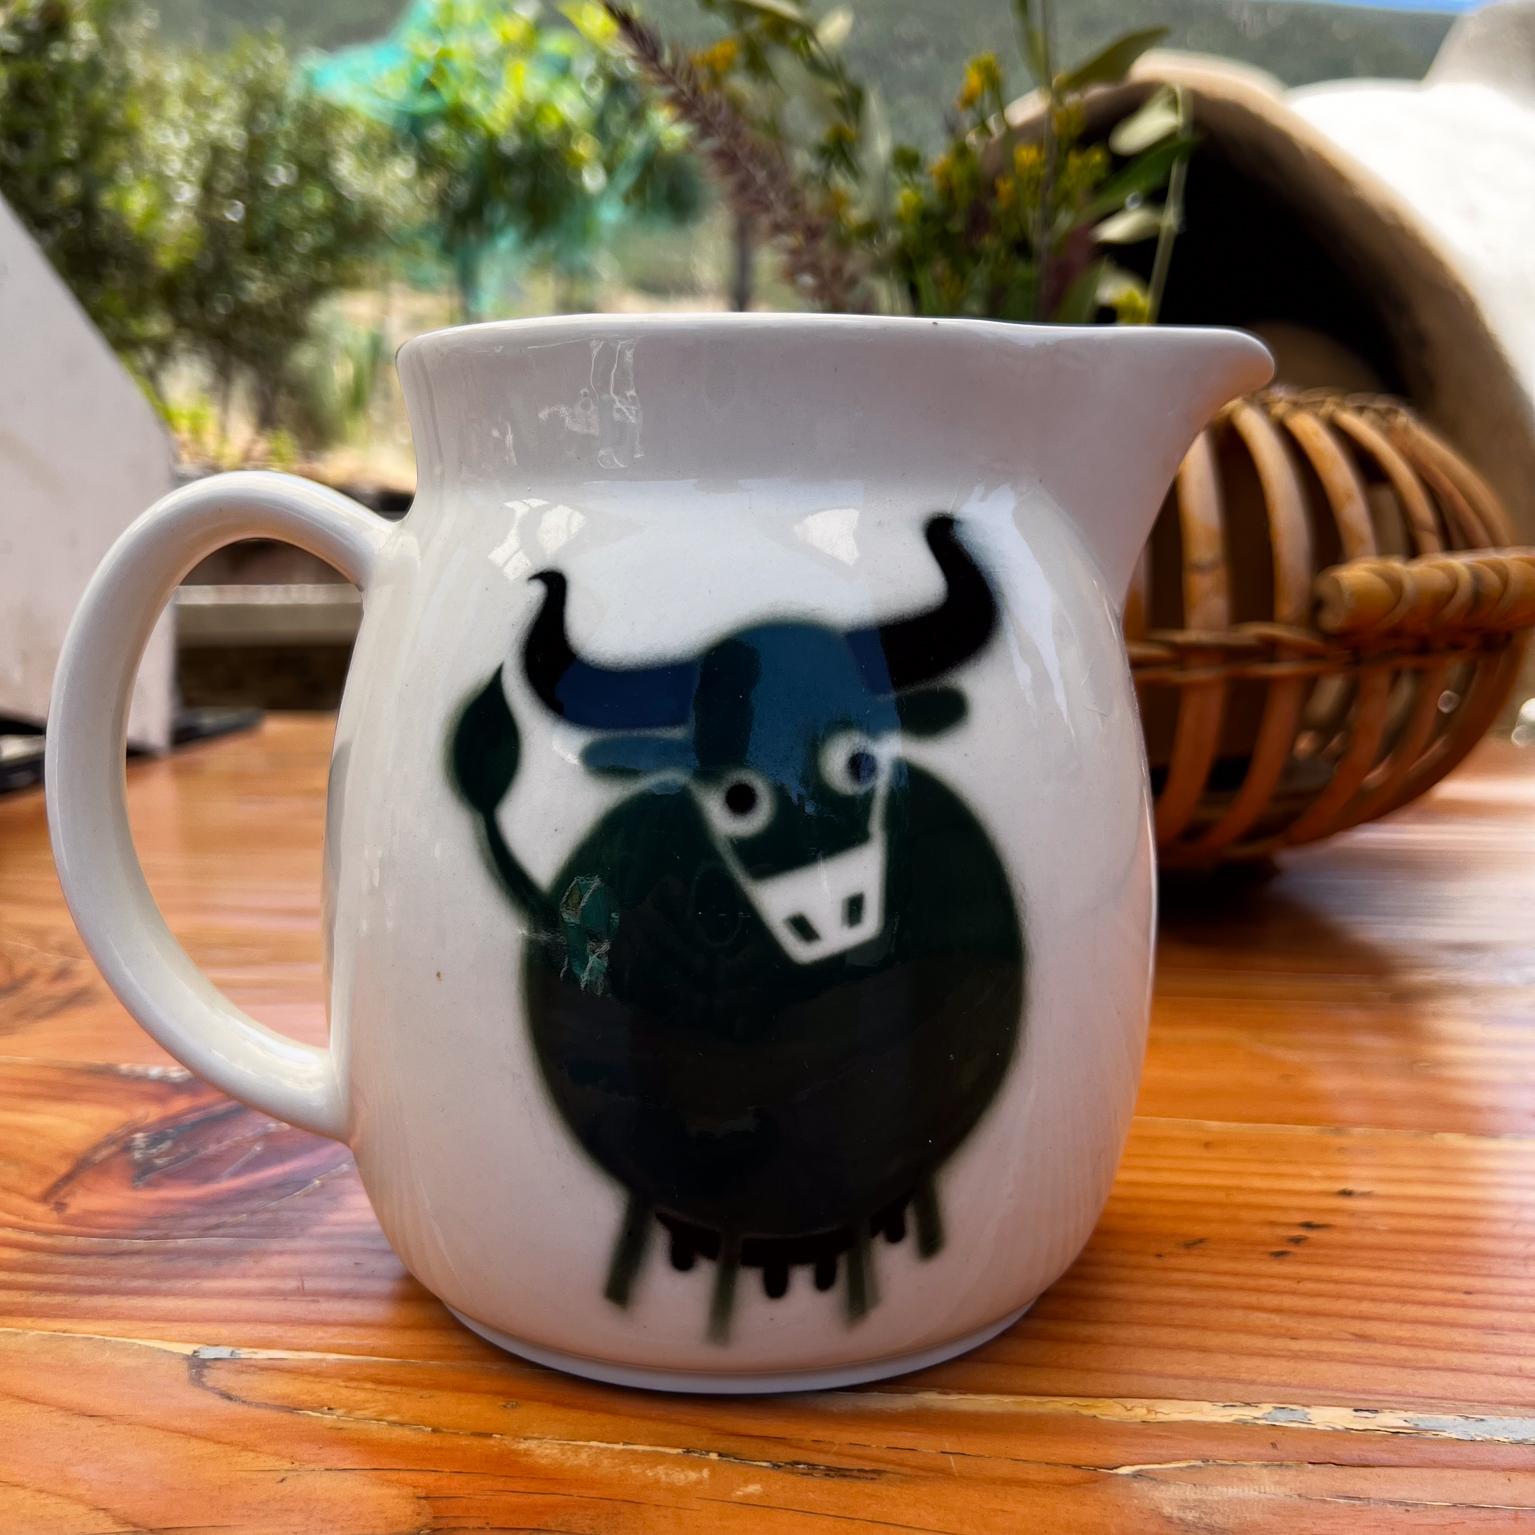 1960s Arabia Green Bull Cow Milk Pitcher Kaj Franck Finland
8 D x 5.25 Tall x 5.25 W
Maker stamped.
Preowned original vintage condition.
Refer to images provided.